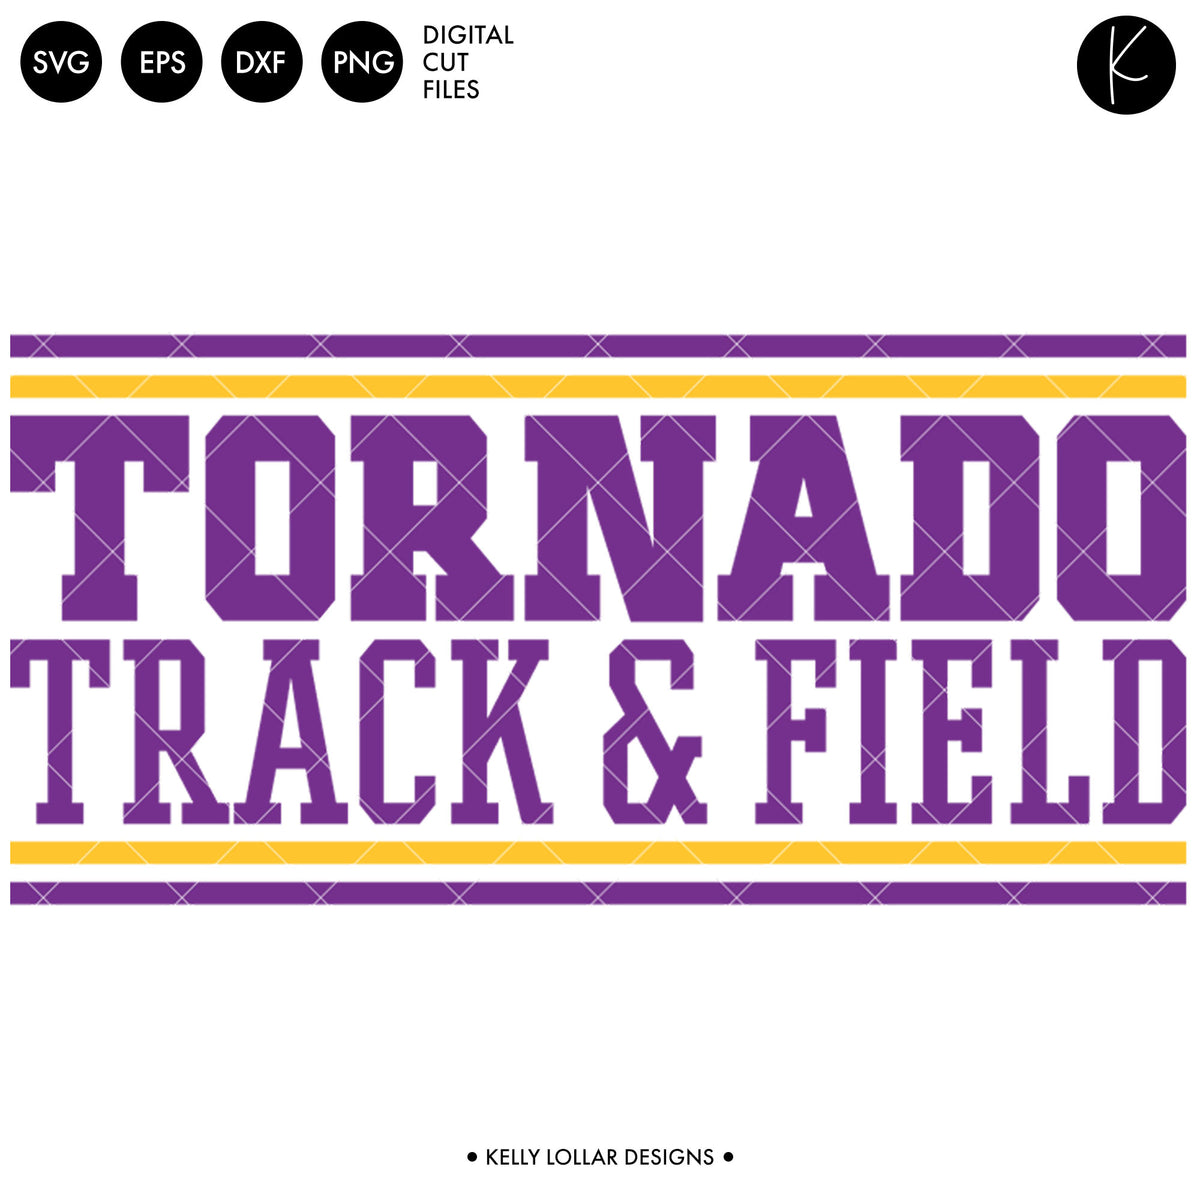 Tornadoes Track &amp; Field Bundle | SVG DXF EPS PNG Cut Files